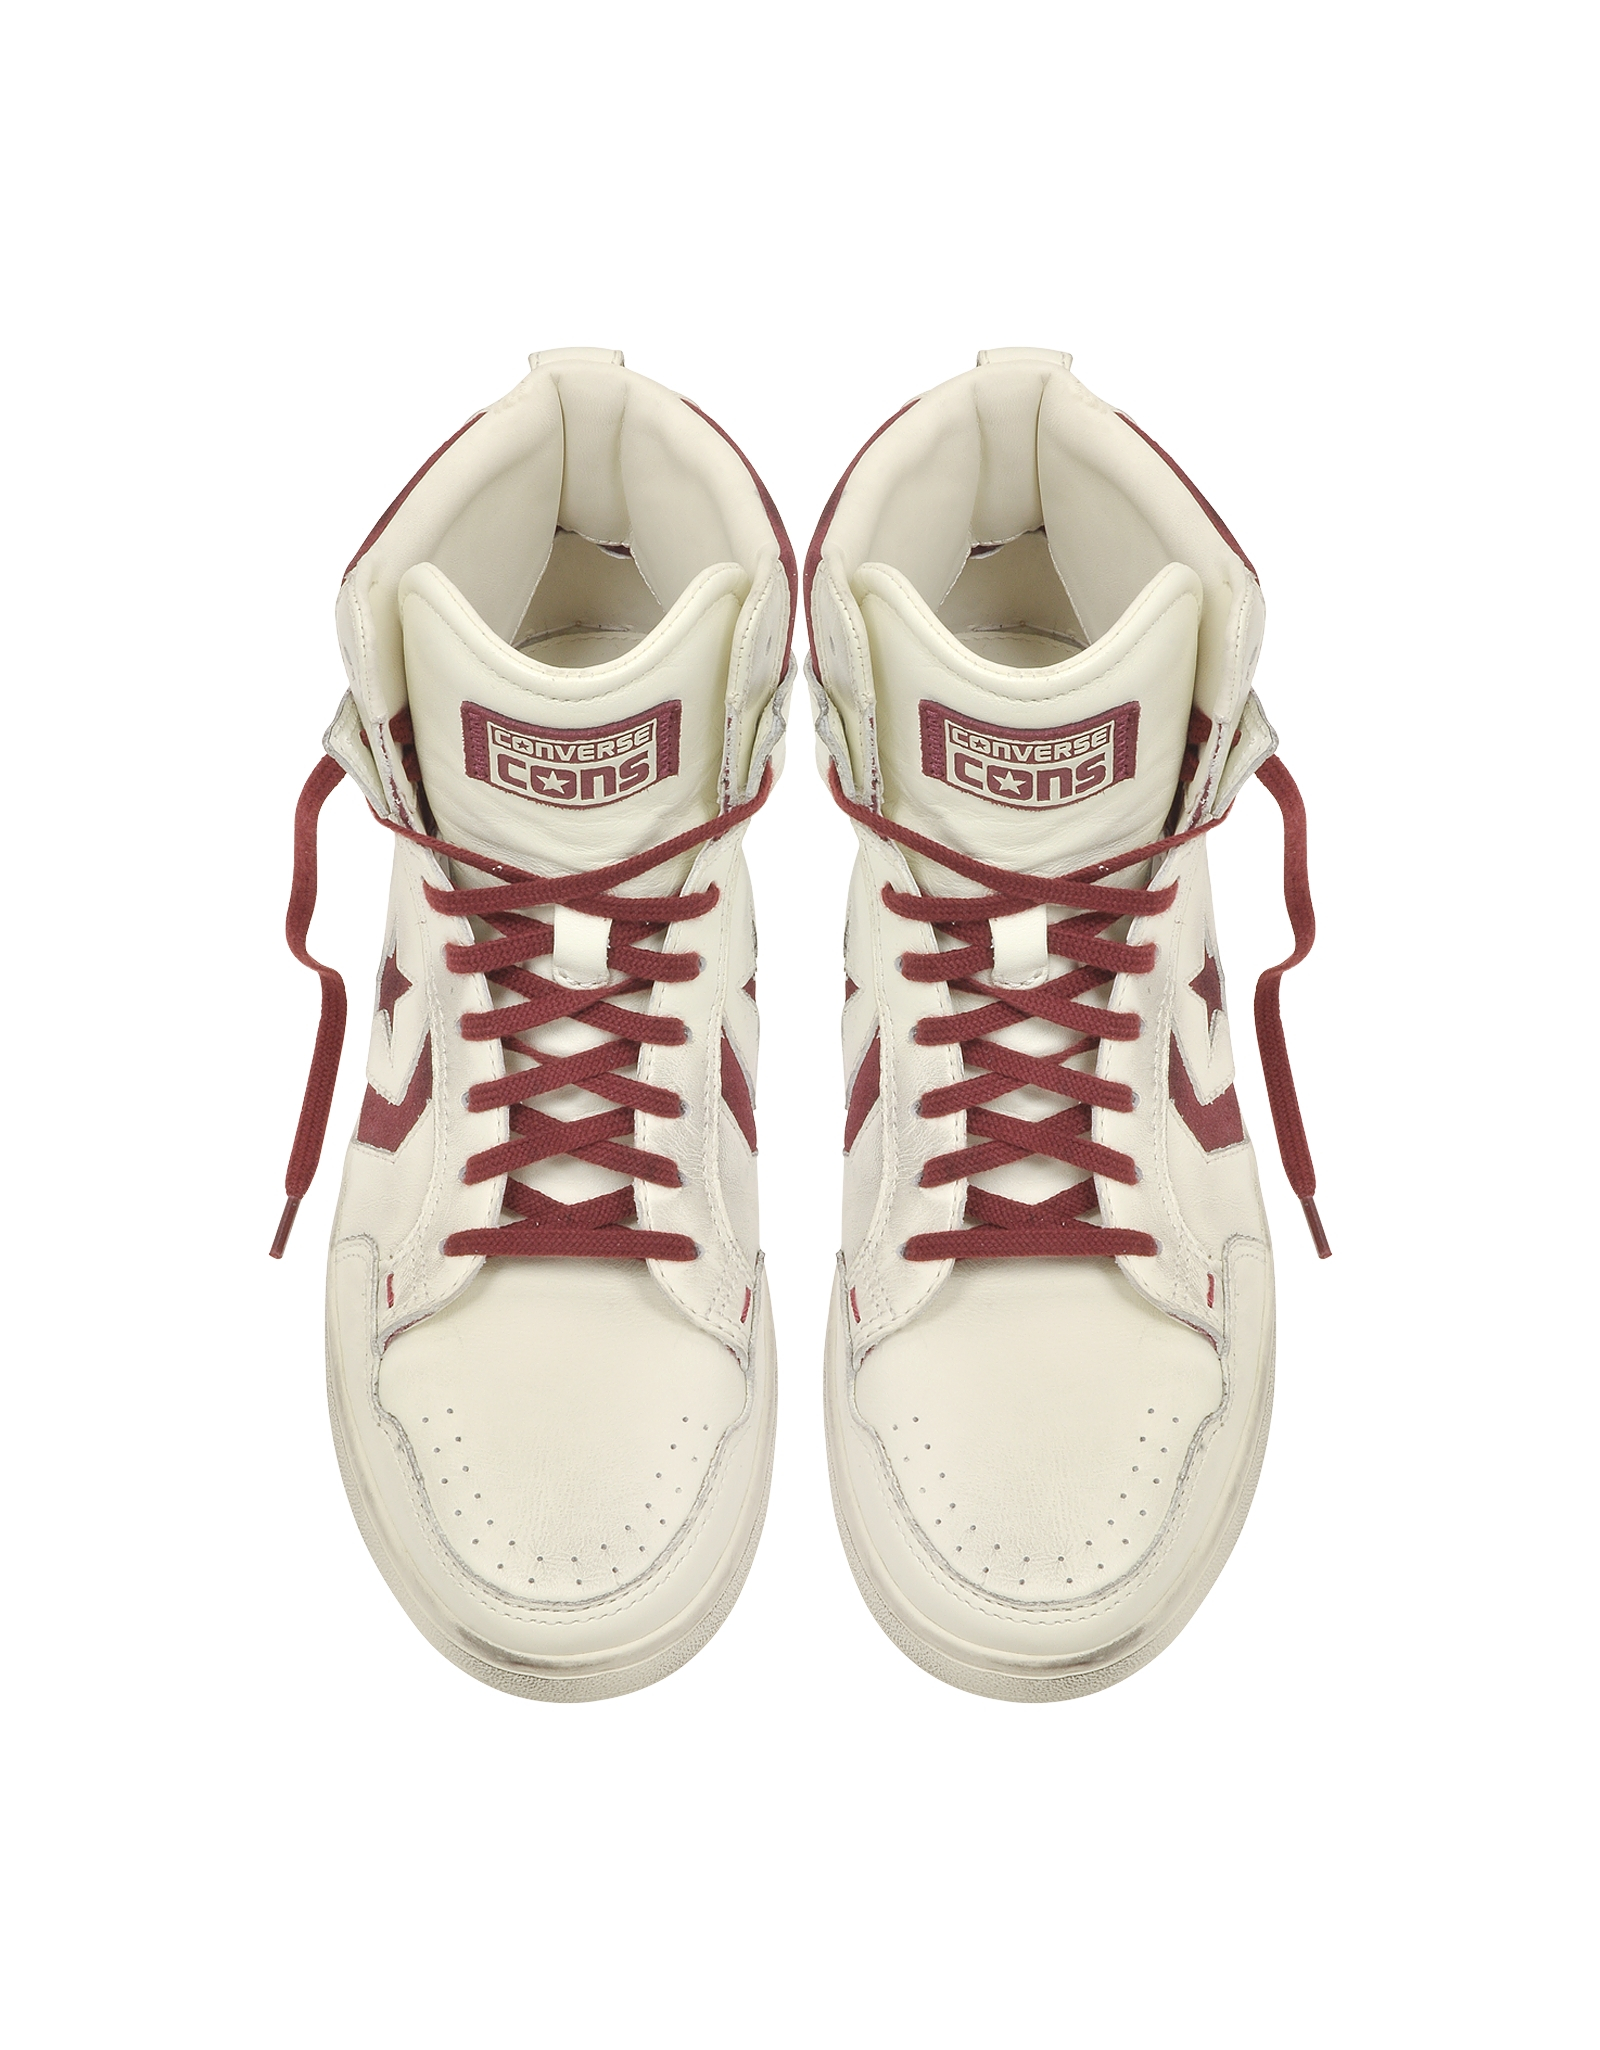 converse weapon high tops